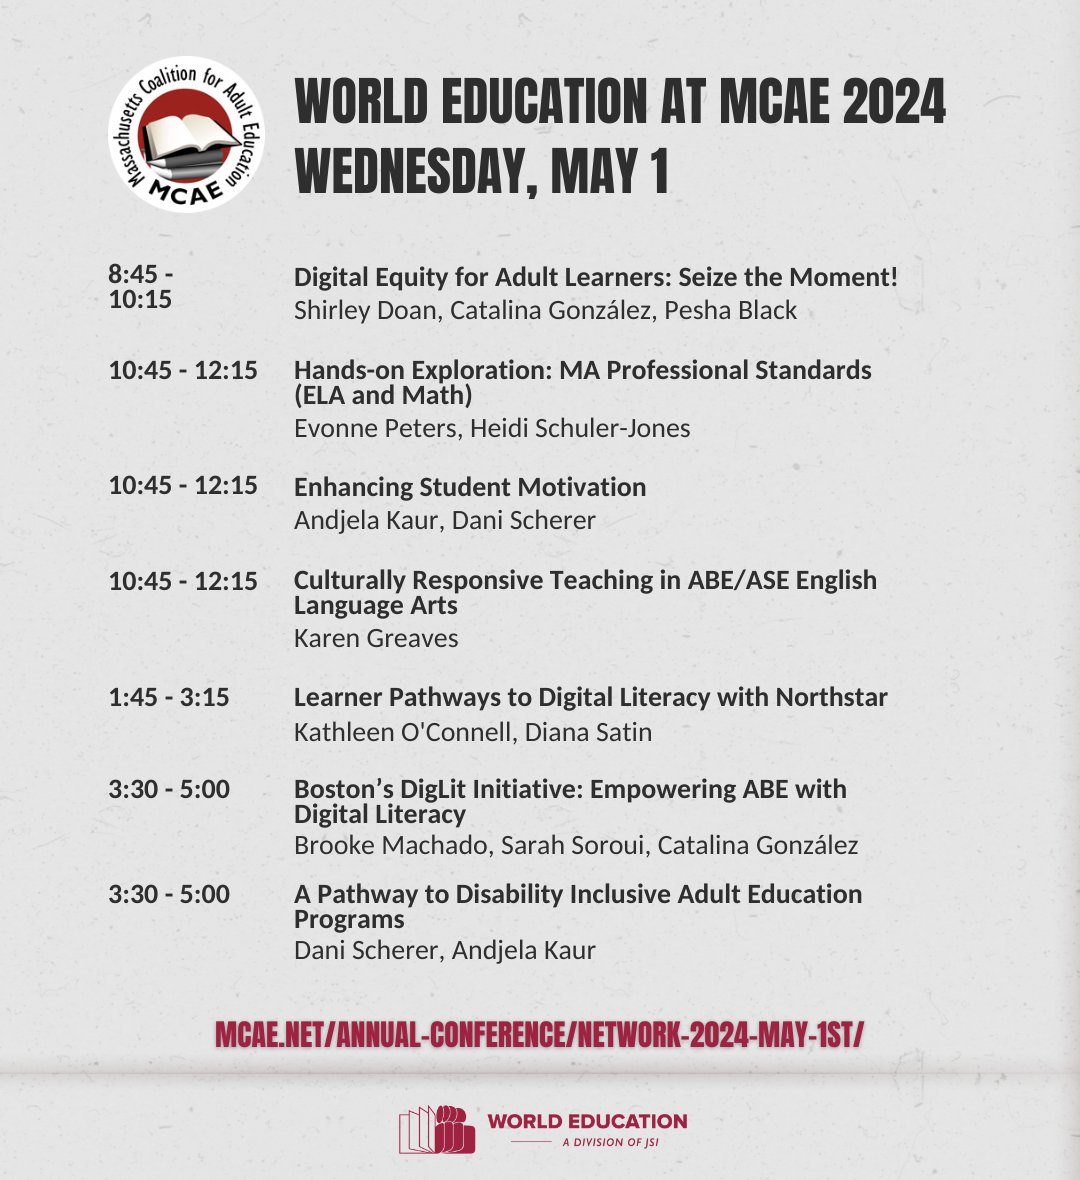 @WorldEd staff will present at the @MAAdultEd NETWORK 2024 conference. Presentation topics include #DigitalEquity, Culturally Responsive Teaching, #DigitalLiteracy, and #DisabilityInclusion. Learn more at ow.ly/ioH650Rhhzh #AdultEdu